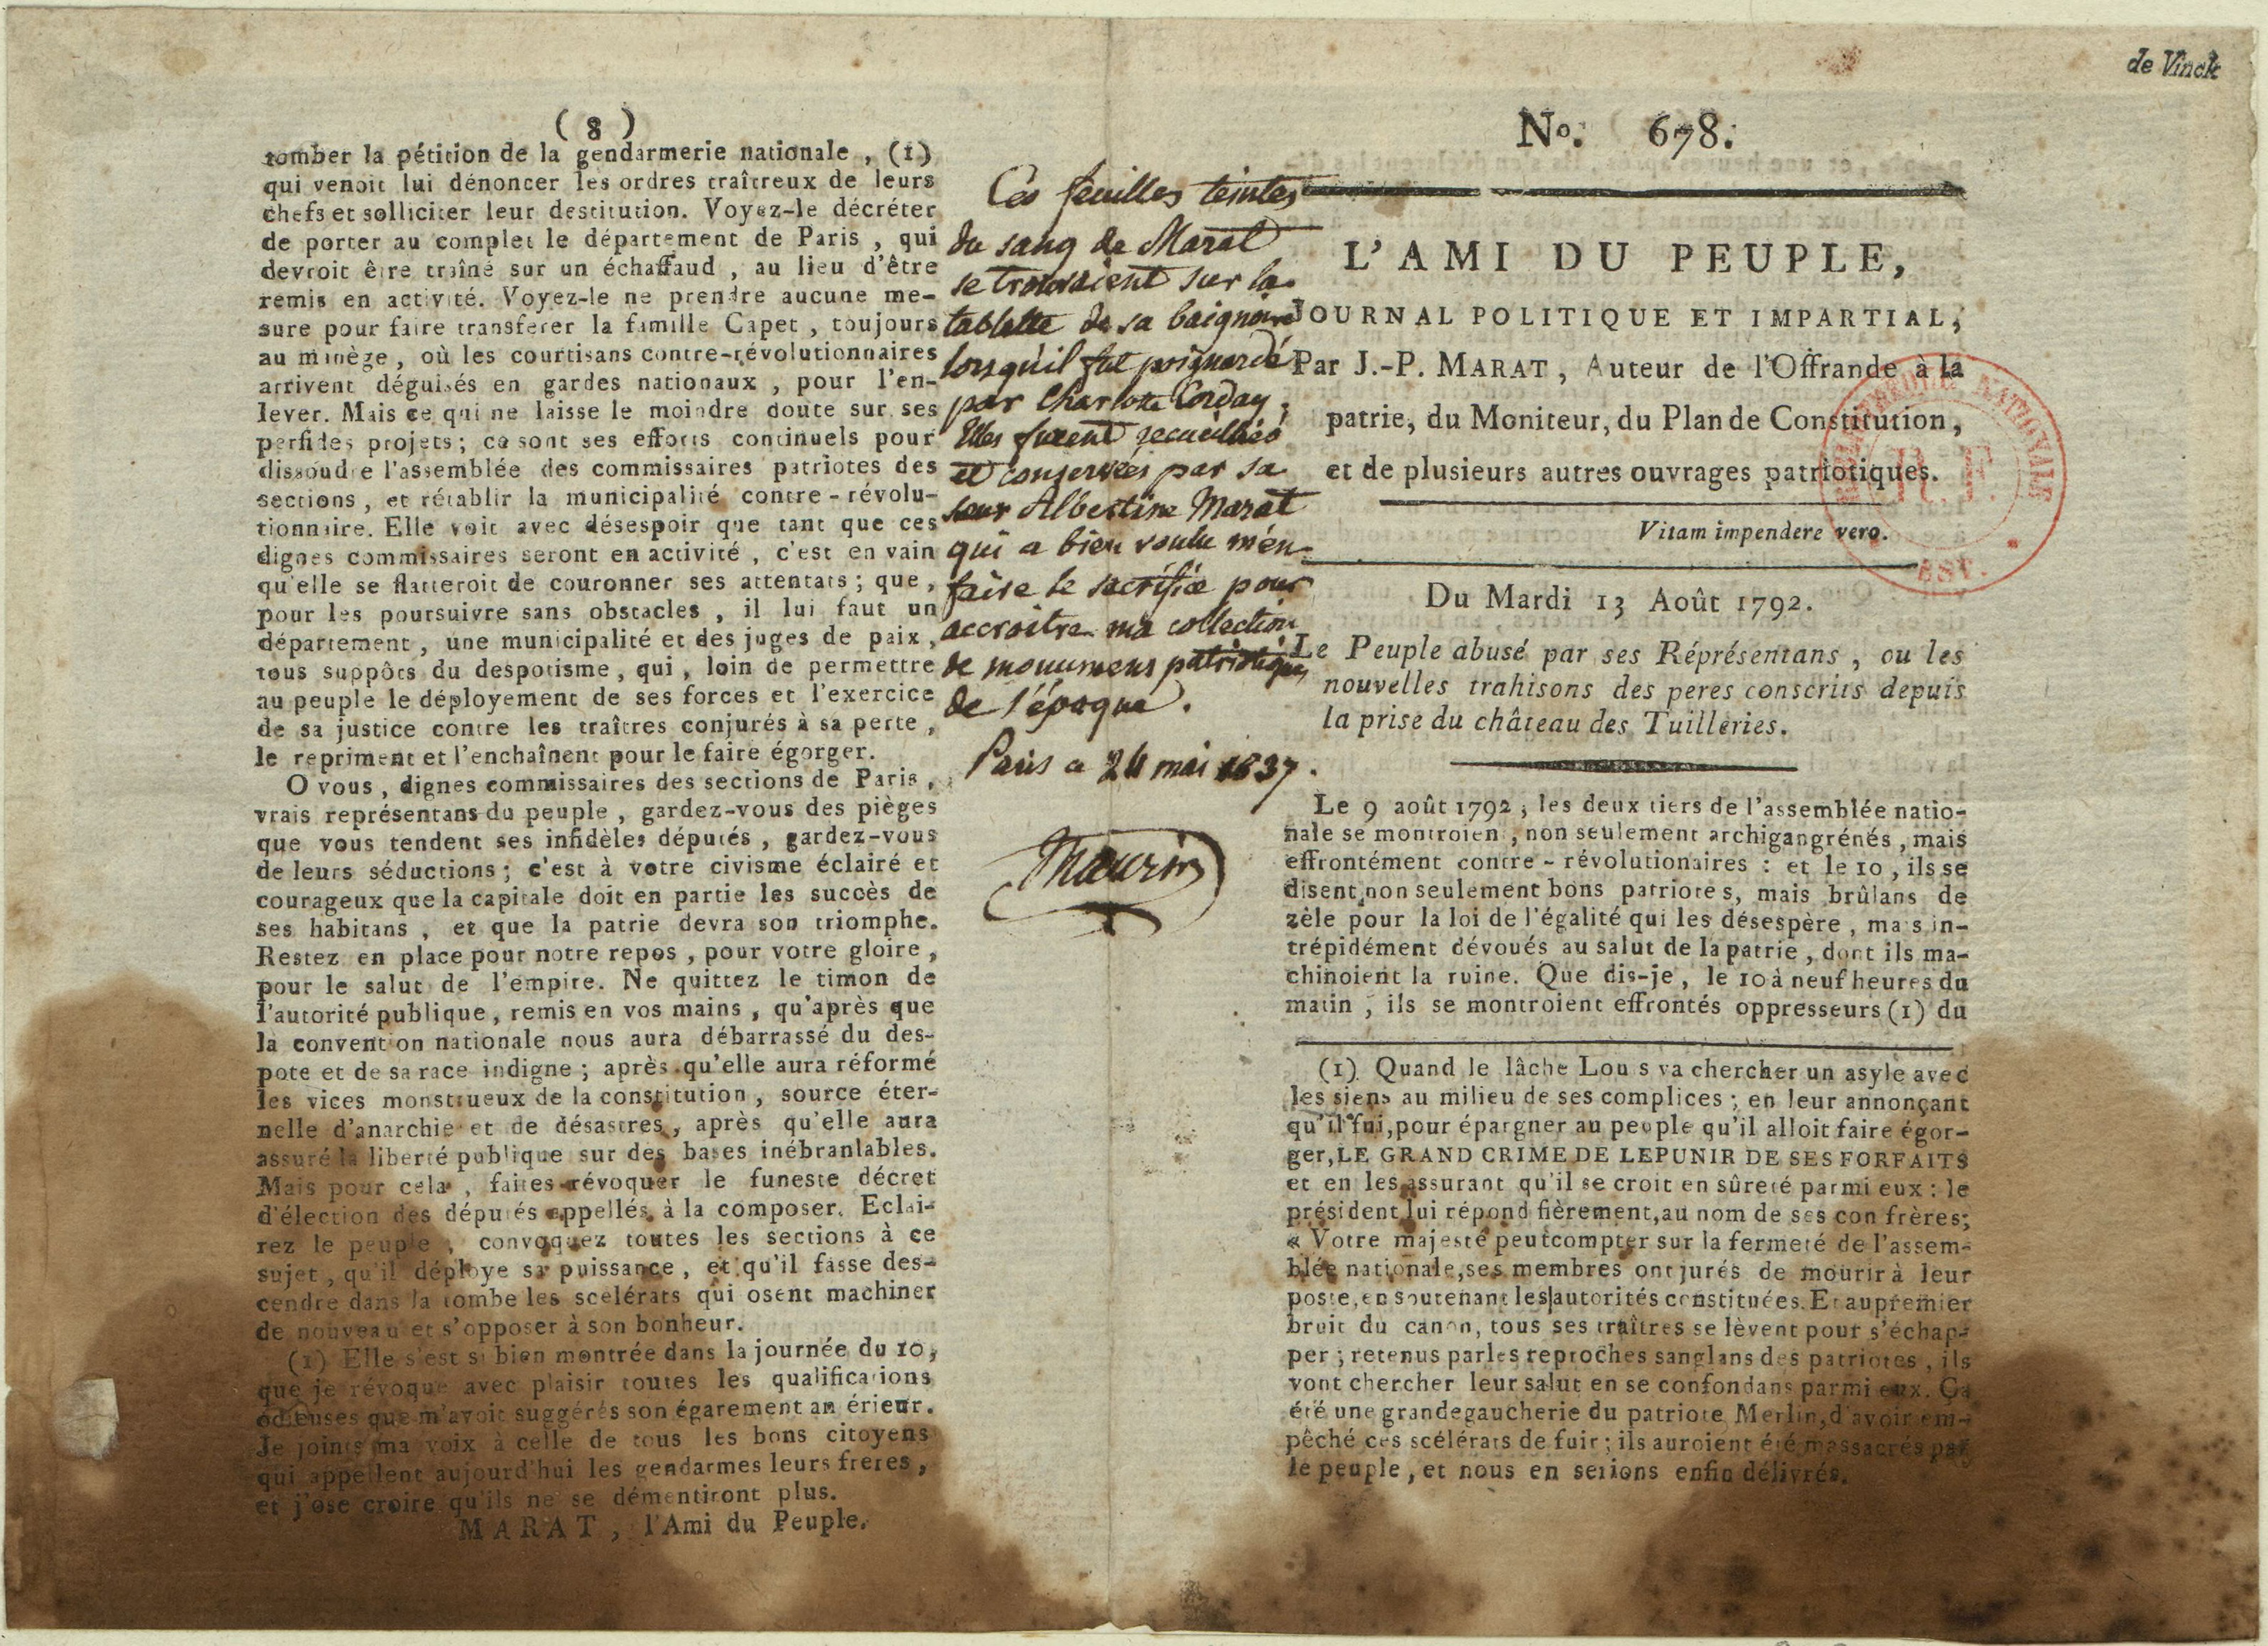 A copy of L’Ami du peuple stained with the blood of Marat, murdered by Charlotte Corday on 13 July 1793, at the time working on this newspaper.jpg